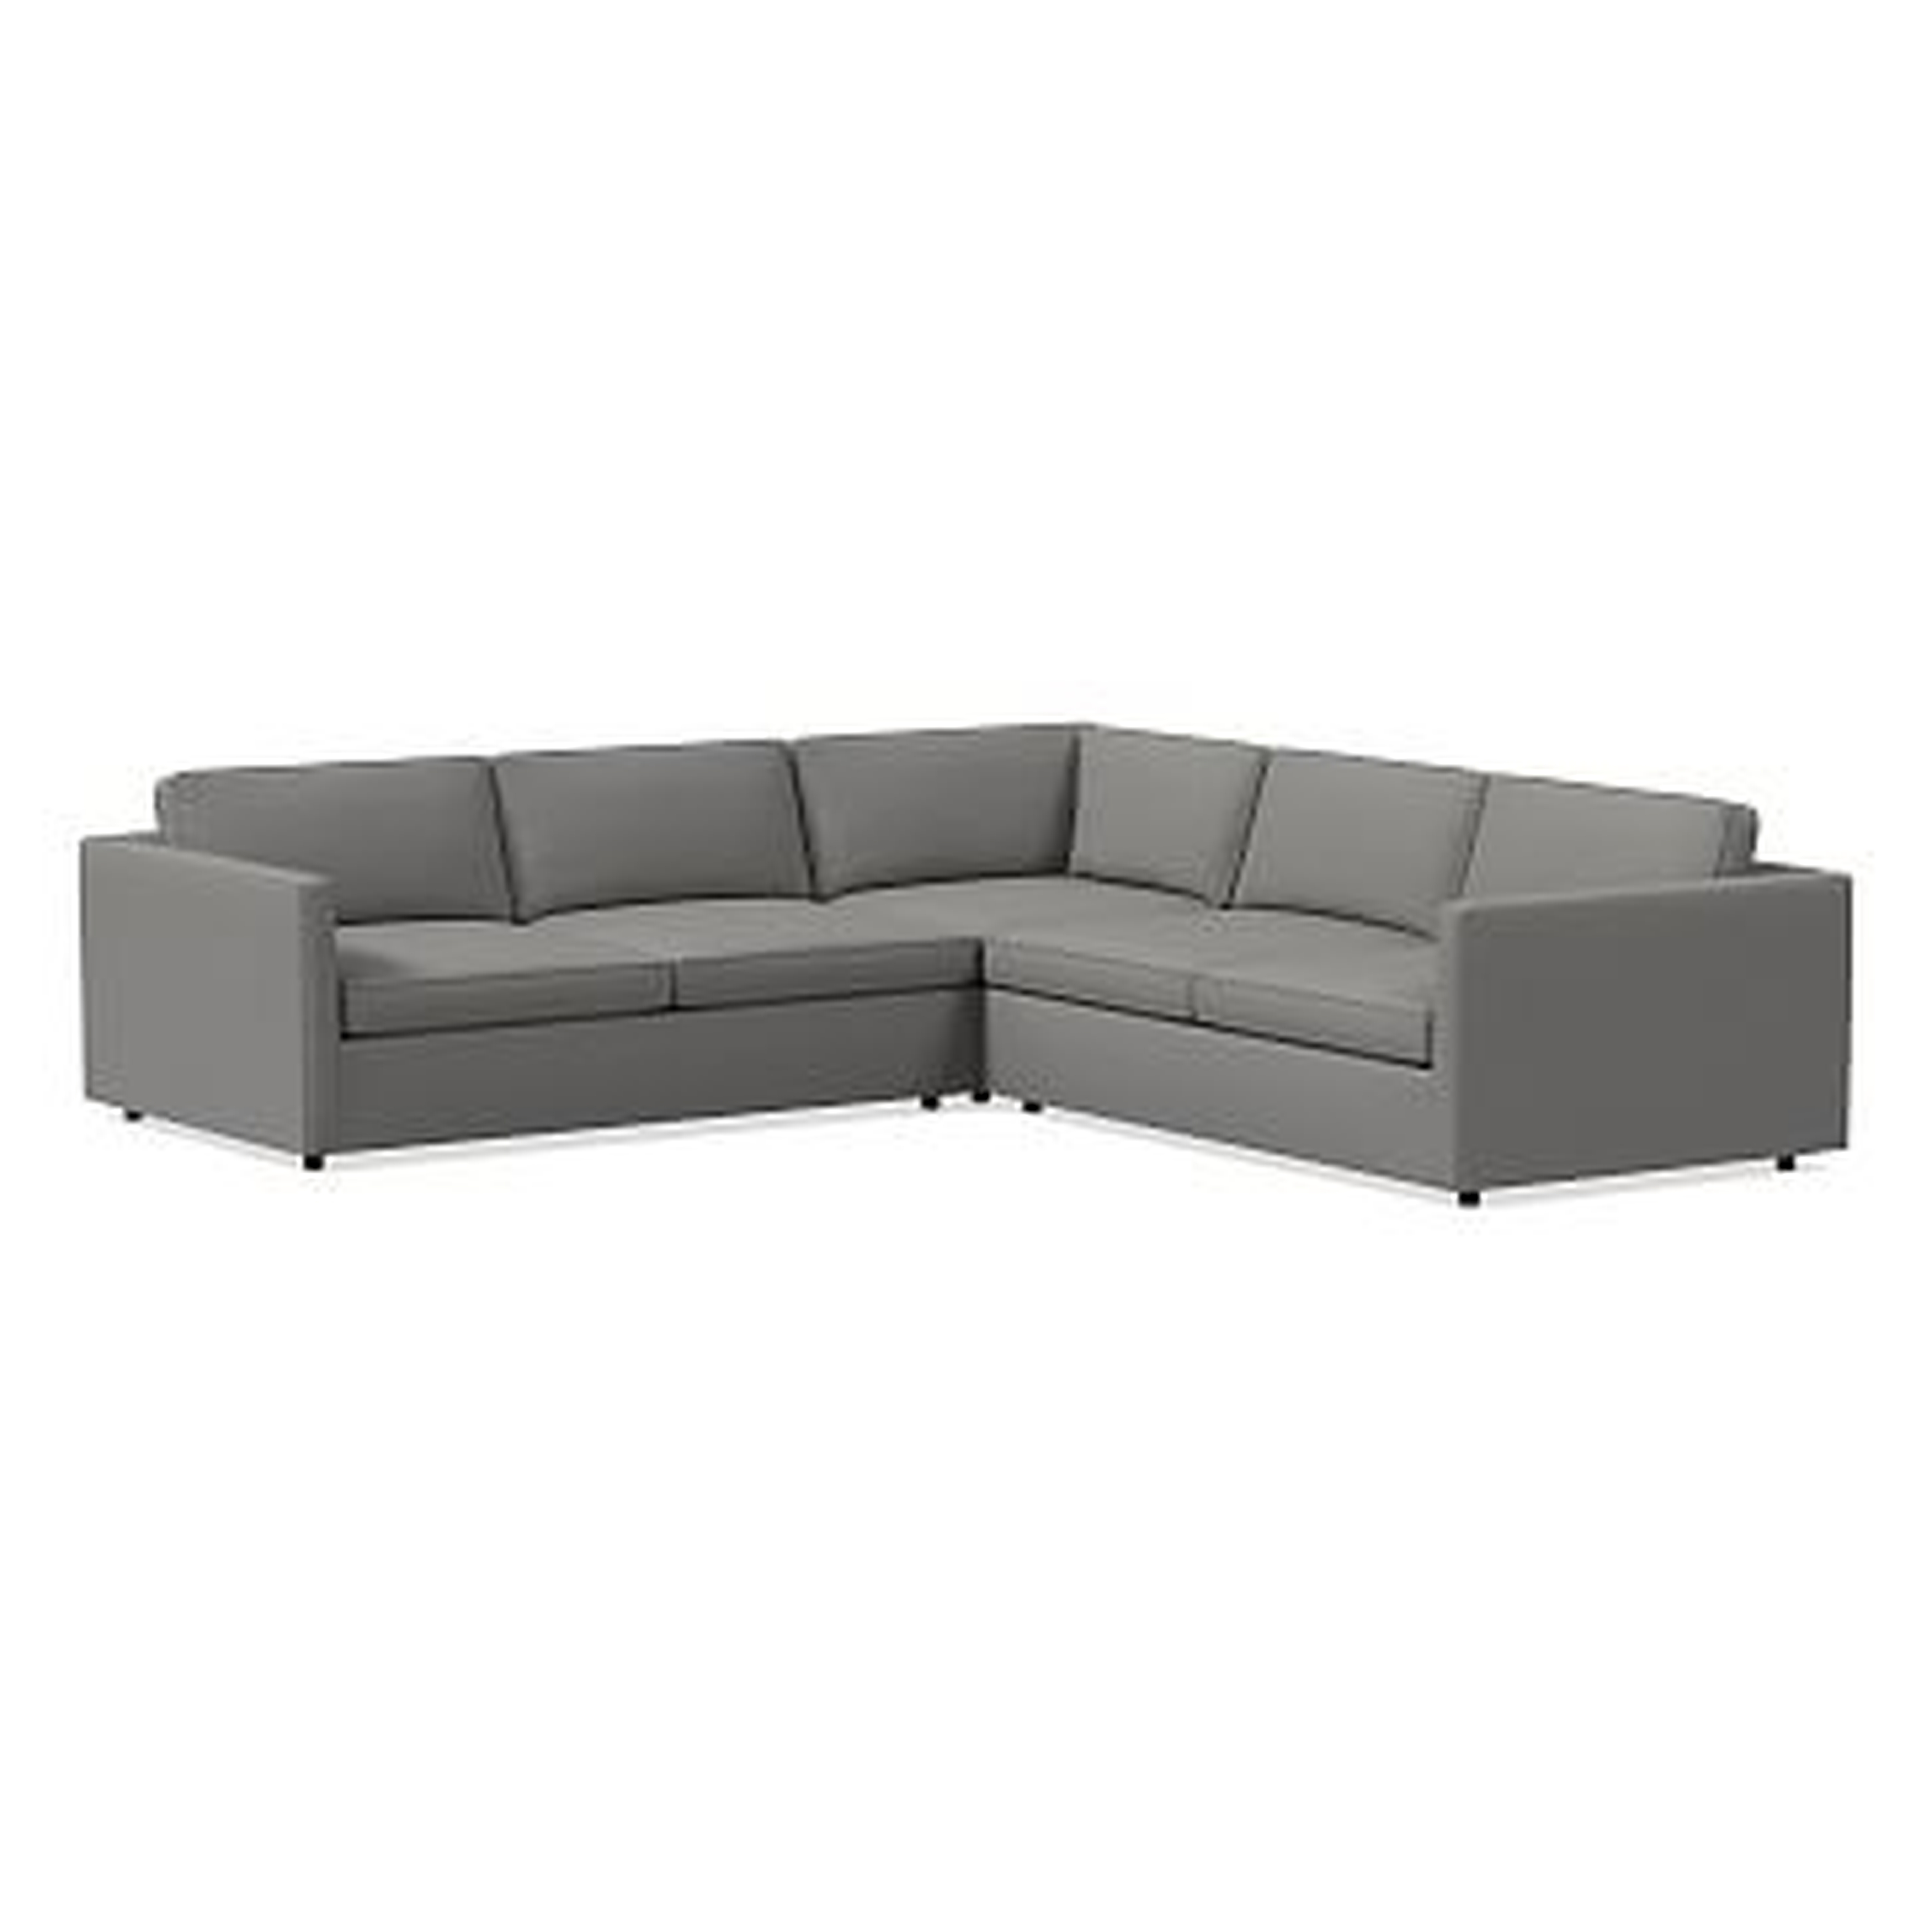 Harris Sectional Set 29: XL Left Arm 75" Sofa, XL Corner, XL Right Arm 75" Sofa , Poly, Performance Washed Canvas, Feather Gray - West Elm